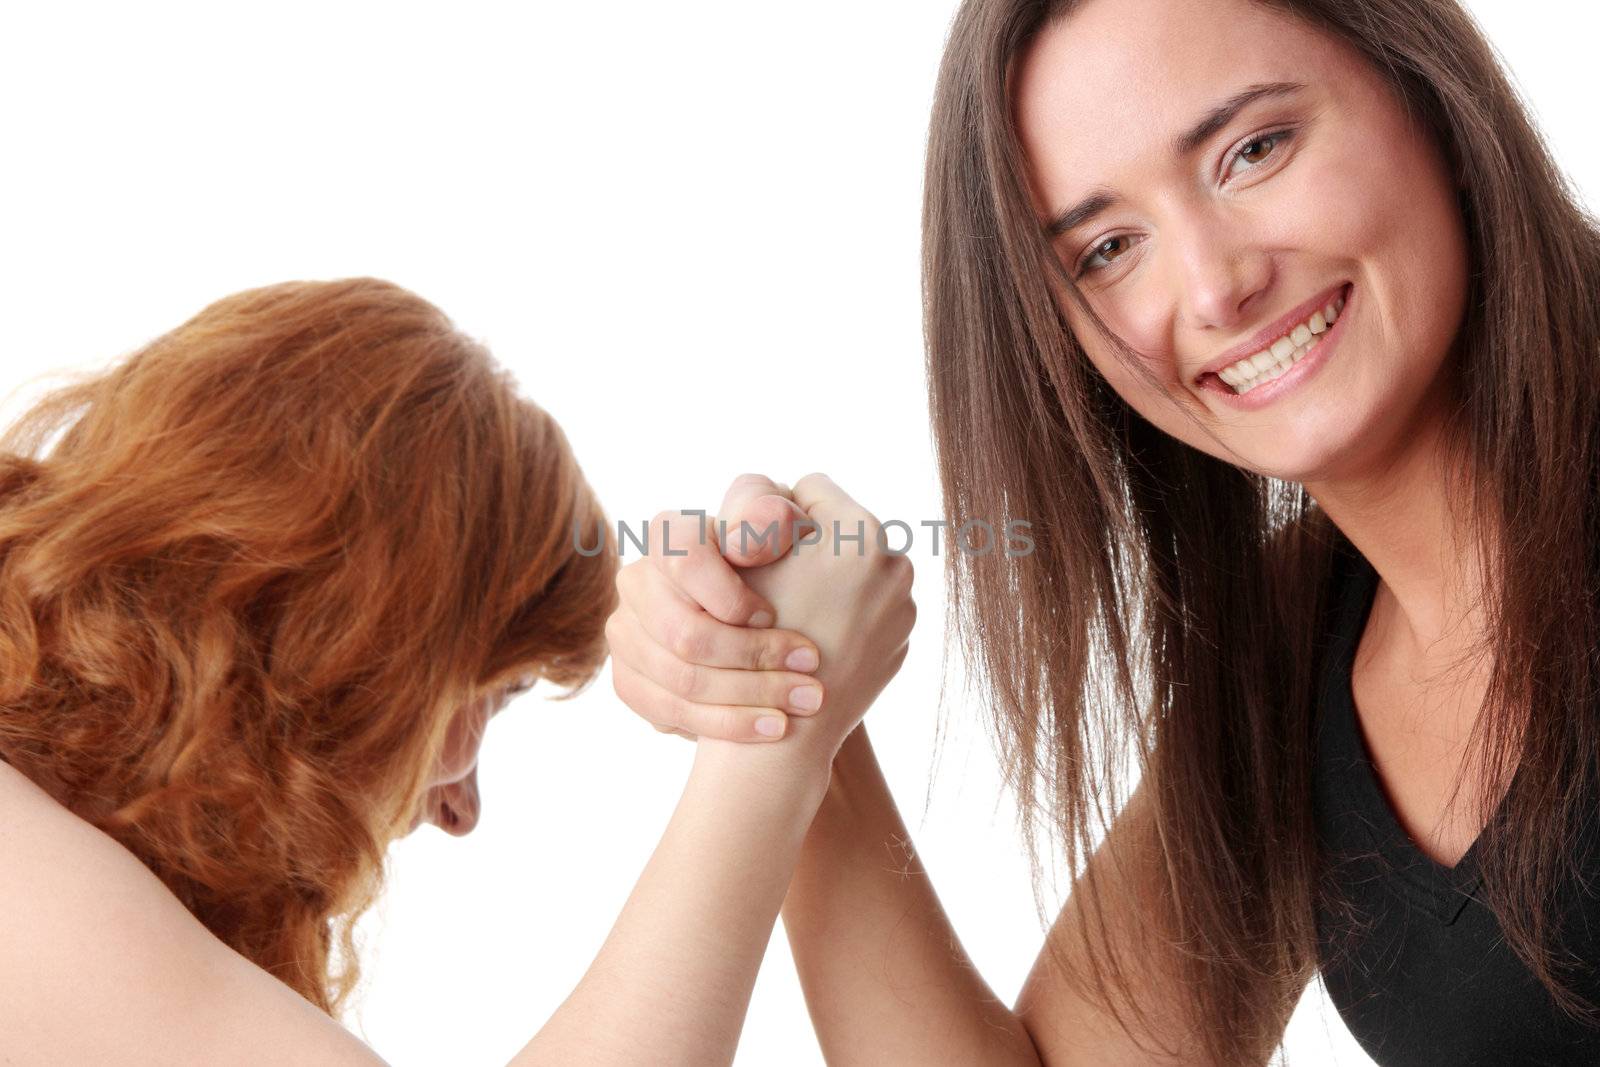 Two womans hands fight, isolated on white background